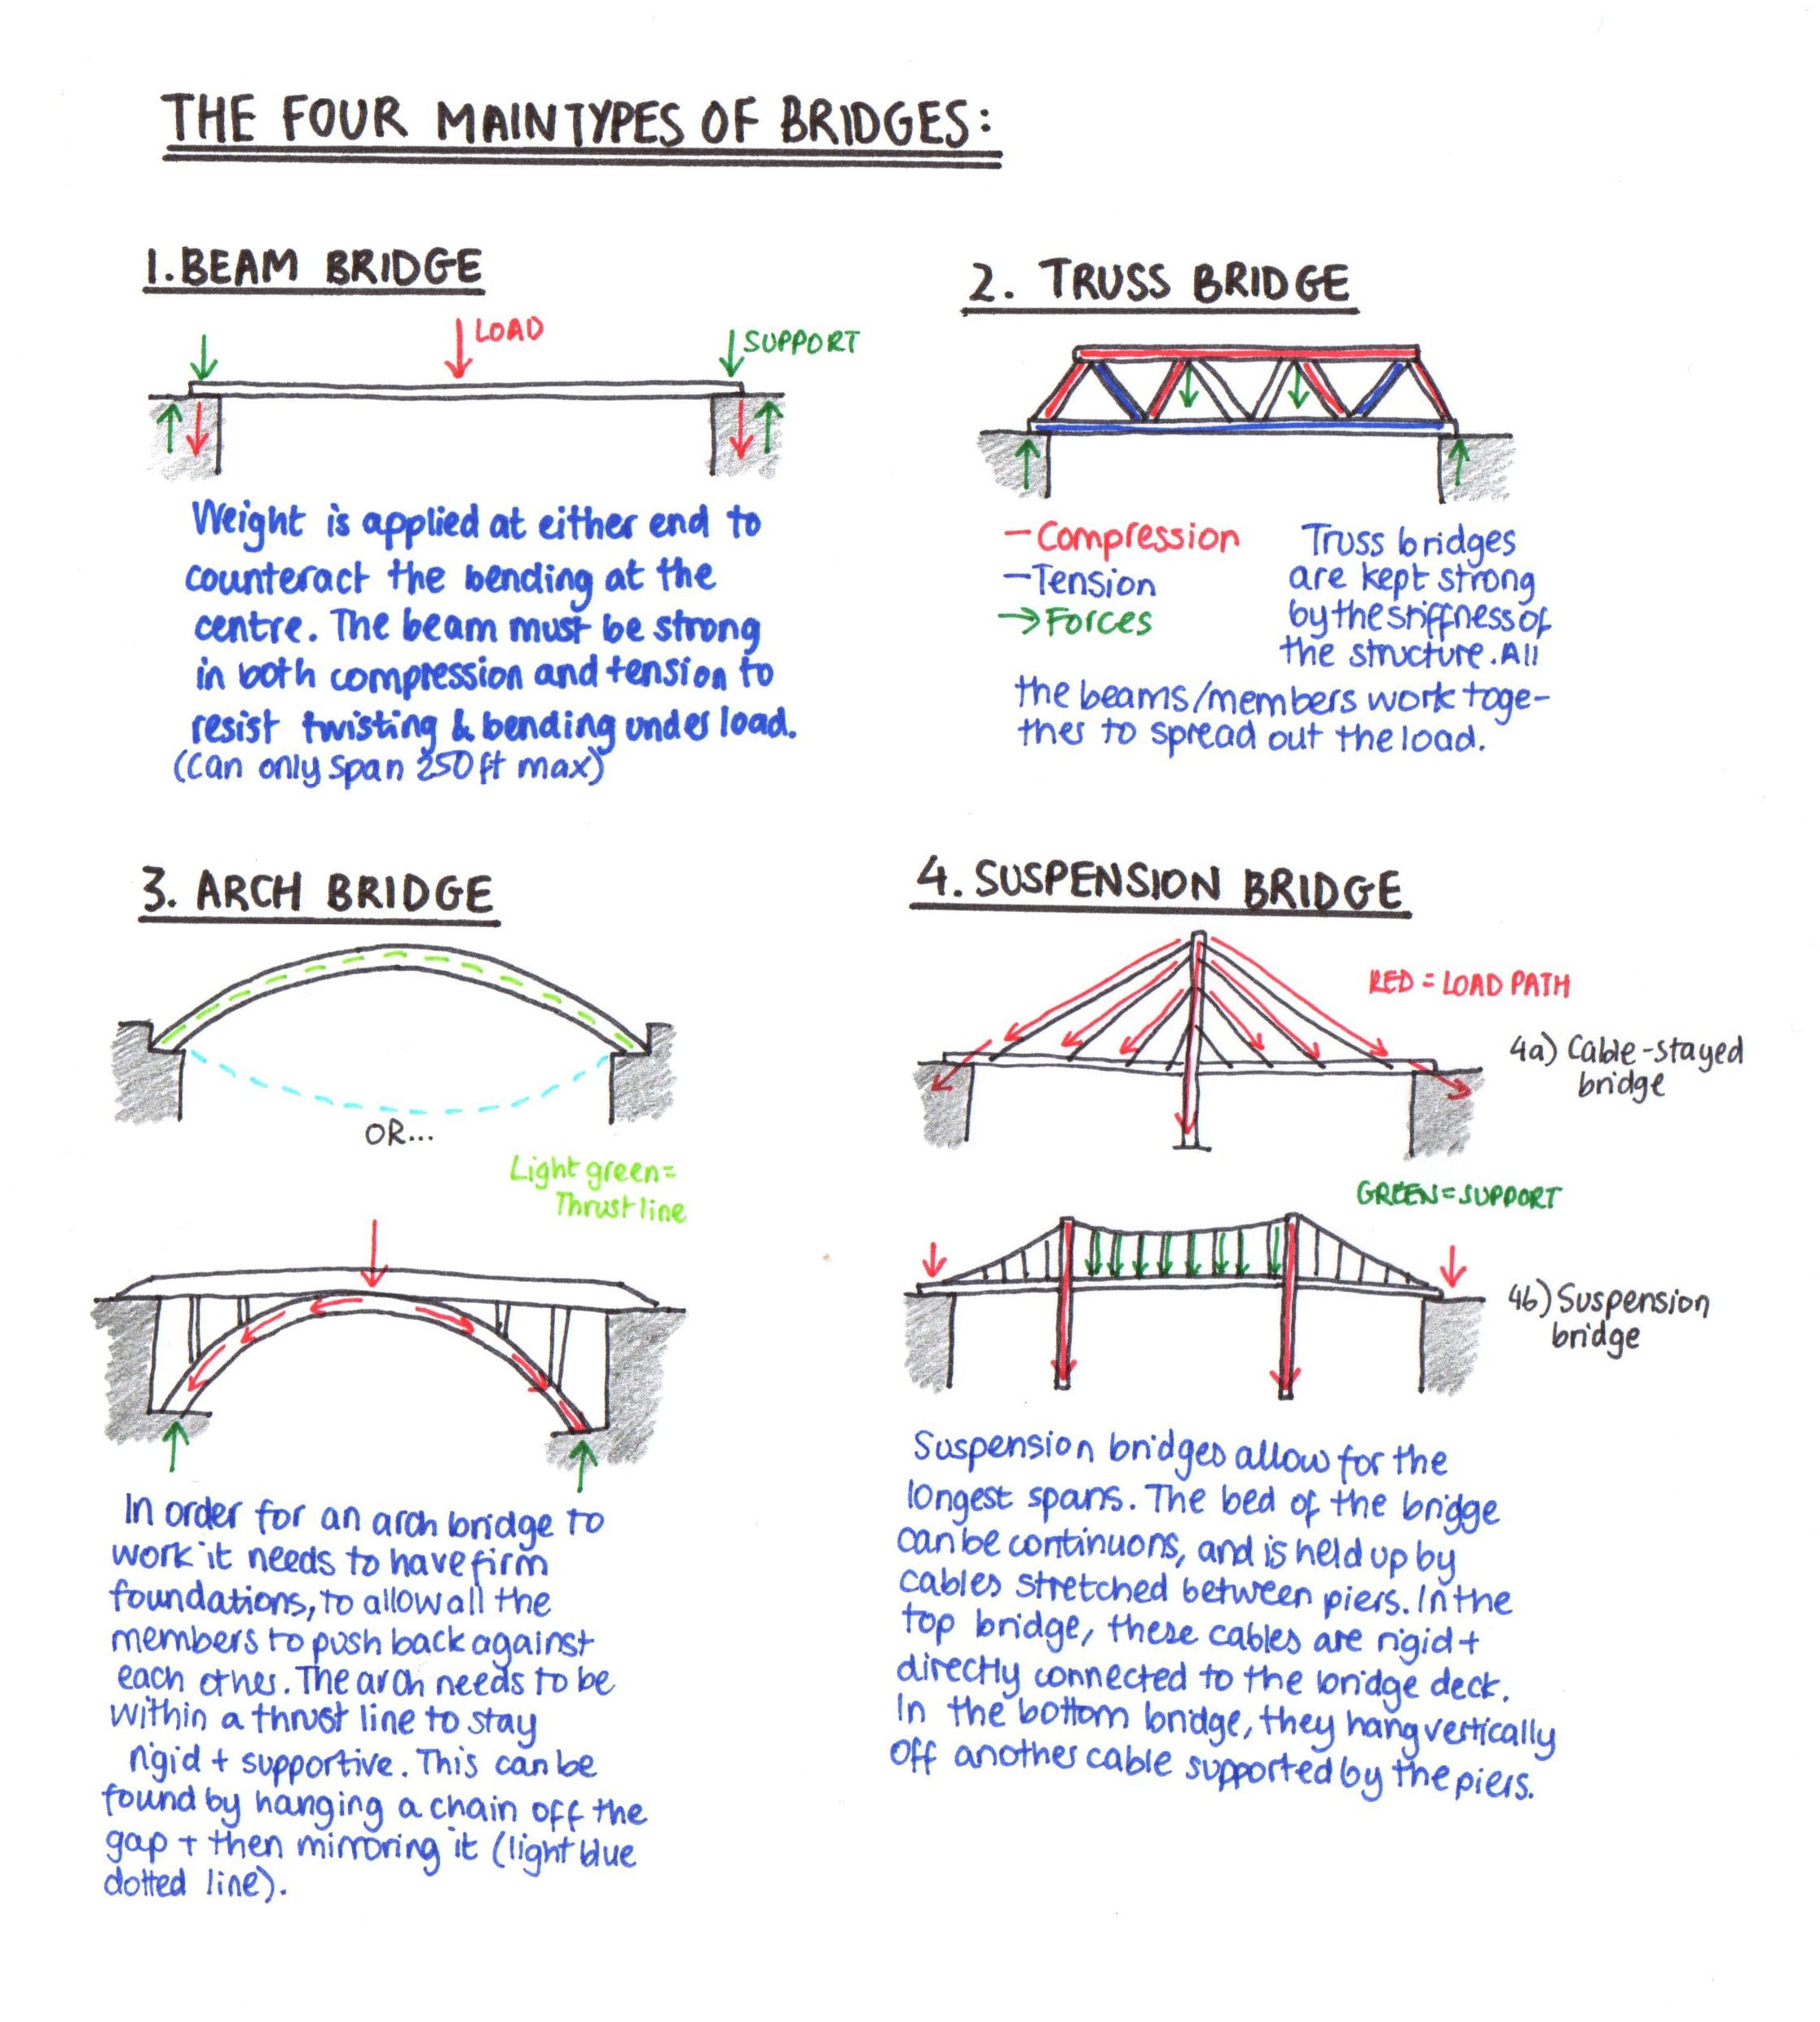 Comparing Cost Effectiveness and Travel Efficiency of Curved and Straight Bridges